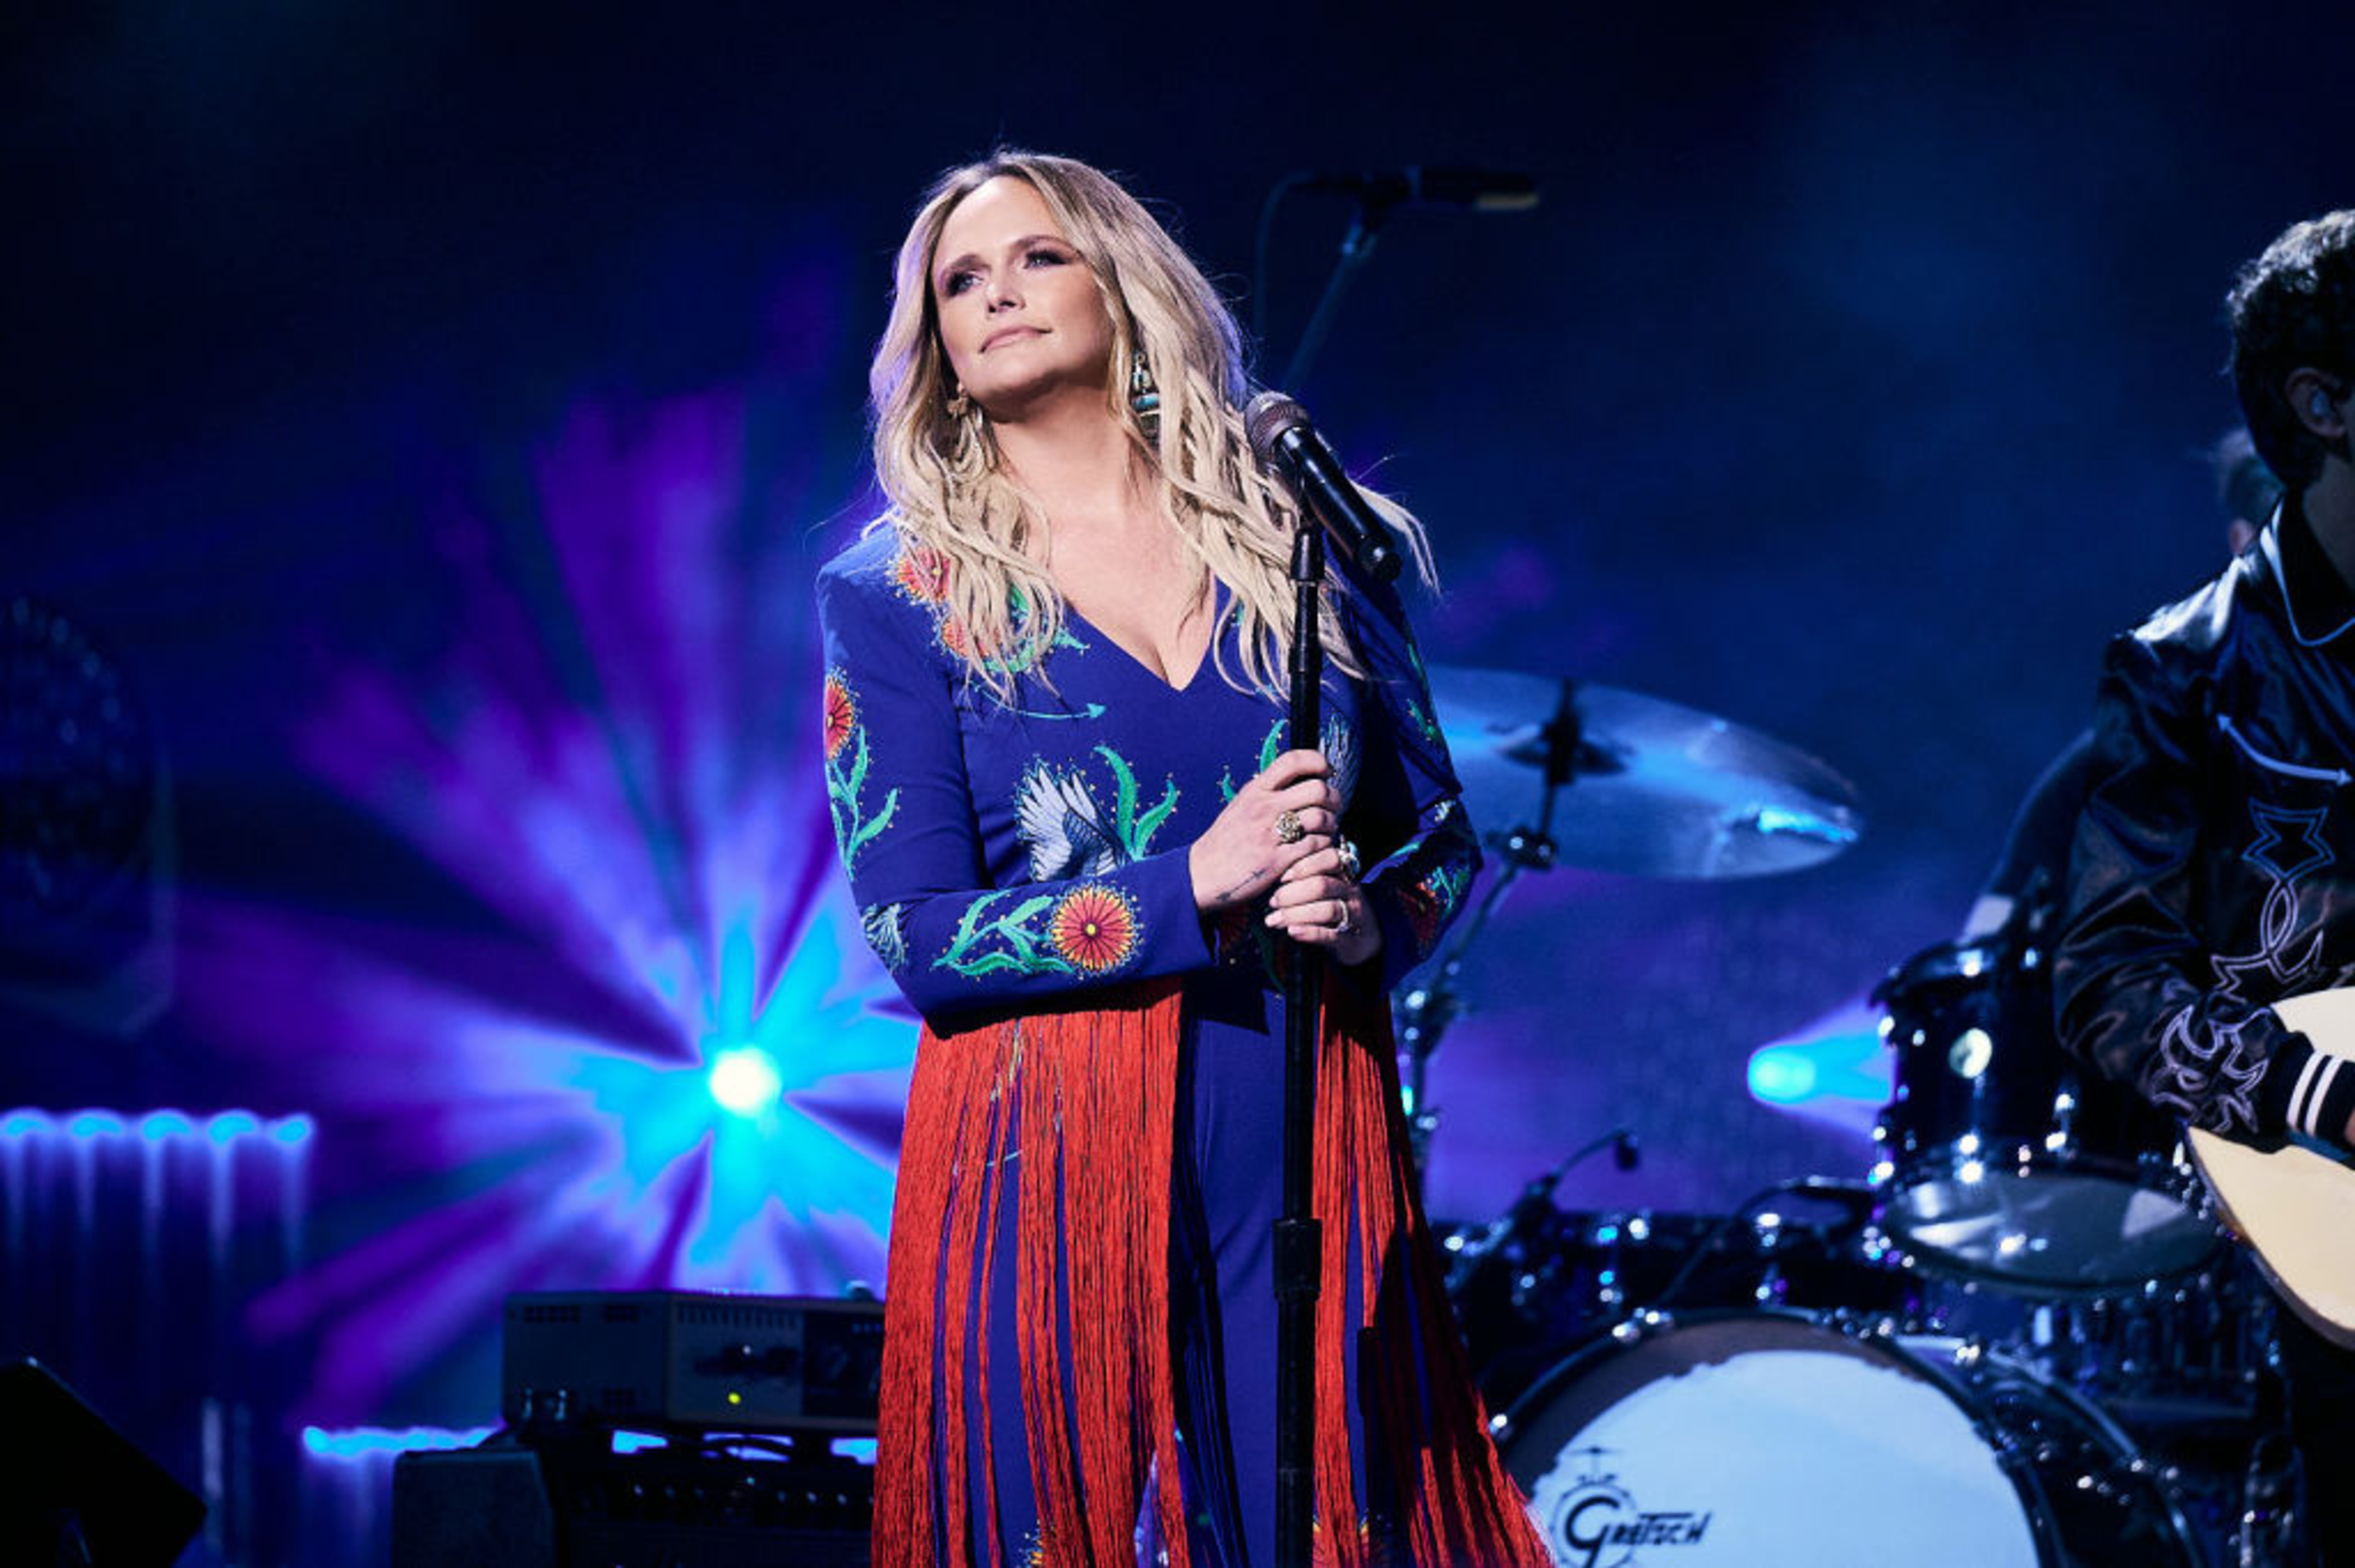 <p>Miranda Lambert's 2020 ballad "Settling Down" is essential for anyone who, like Lambert sings in this song, has their "feet on the ground and head up in the clouds." </p><p>You may also like: <a href='https://www.yardbarker.com/entertainment/articles/notable_music_artists_who_play_multiple_instruments_quite_well/s1__39216248'>Notable music artists who play multiple instruments quite well</a></p>